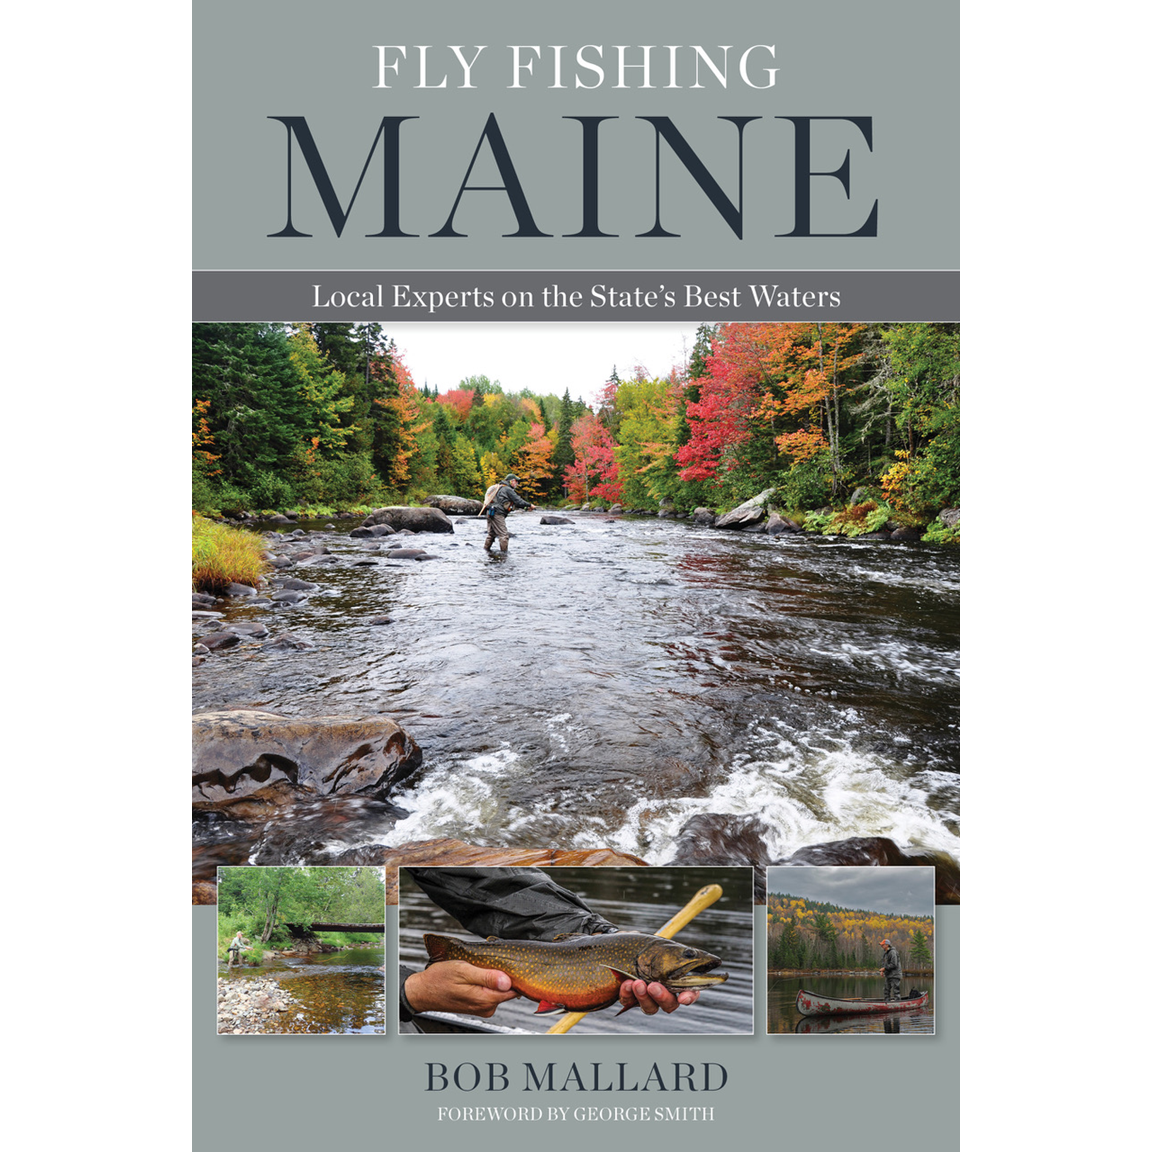 FLY FISHING MAINE: LOCAL EXPERTS ON THE STATE'S BEST WATERS (SIGNED) - Bob  Mallard Fly Fishing